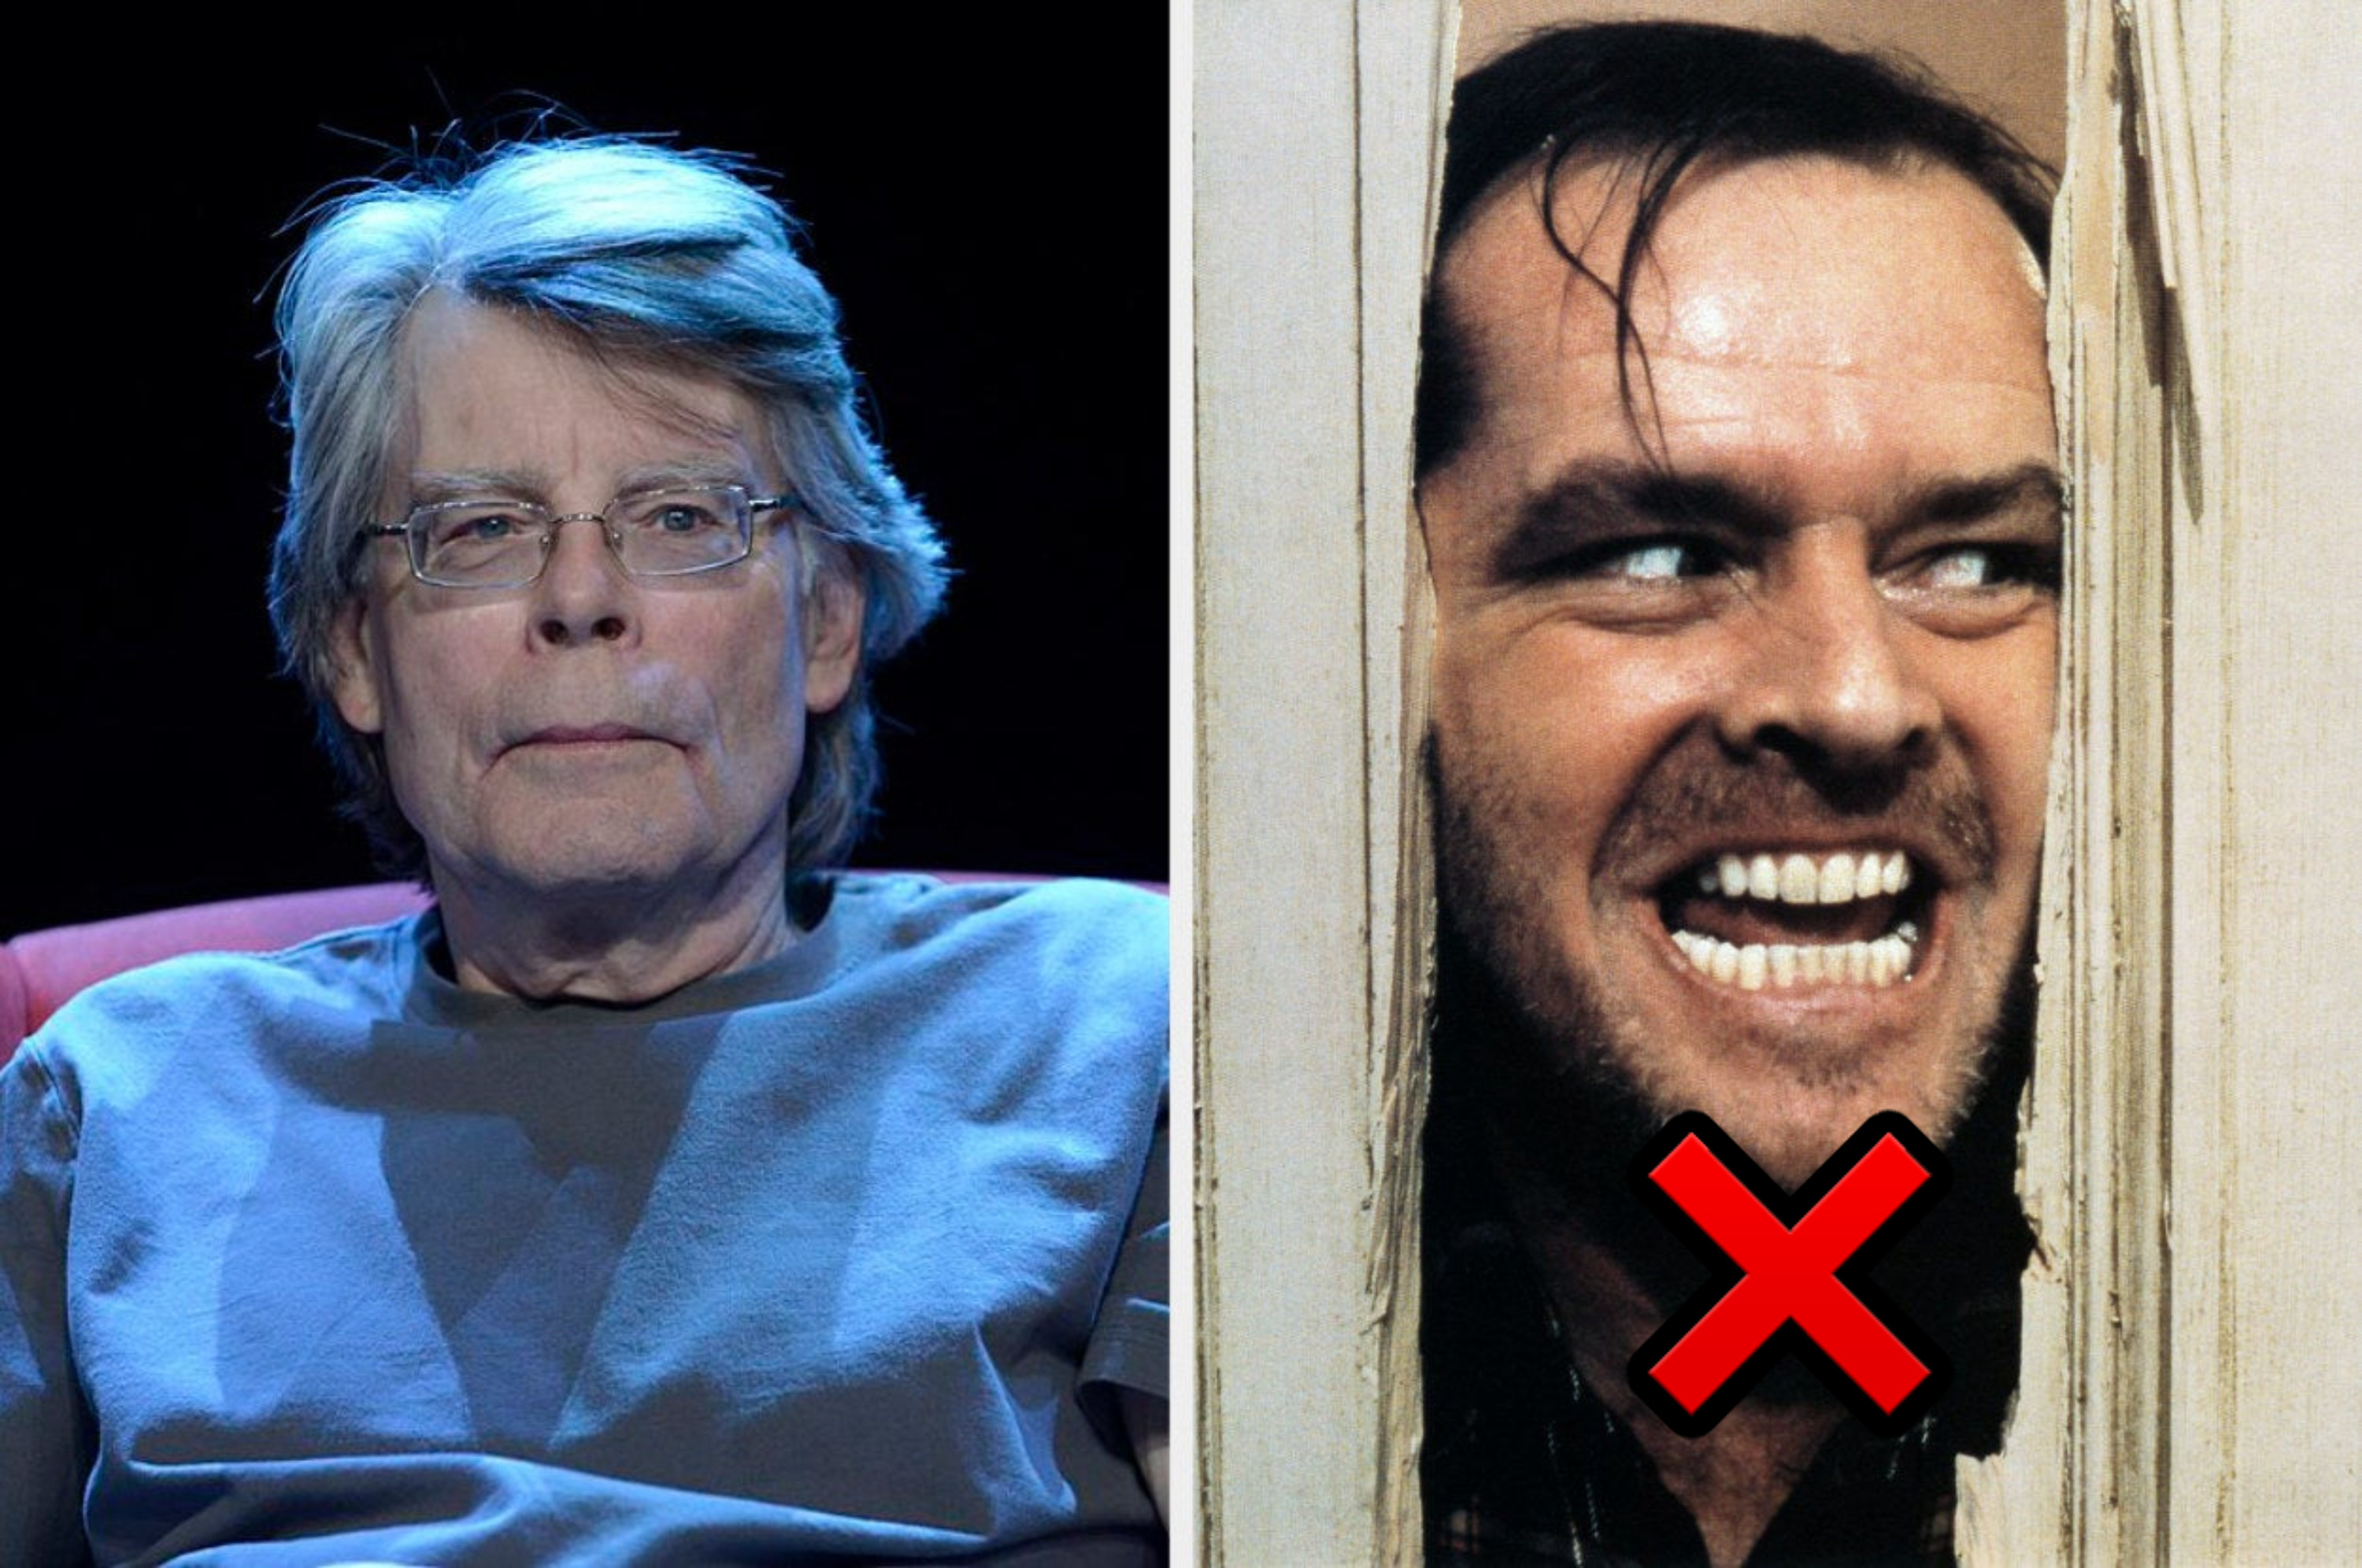 Stephen King and Nicholson as Jack during the Here&#x27;s Johnny scene